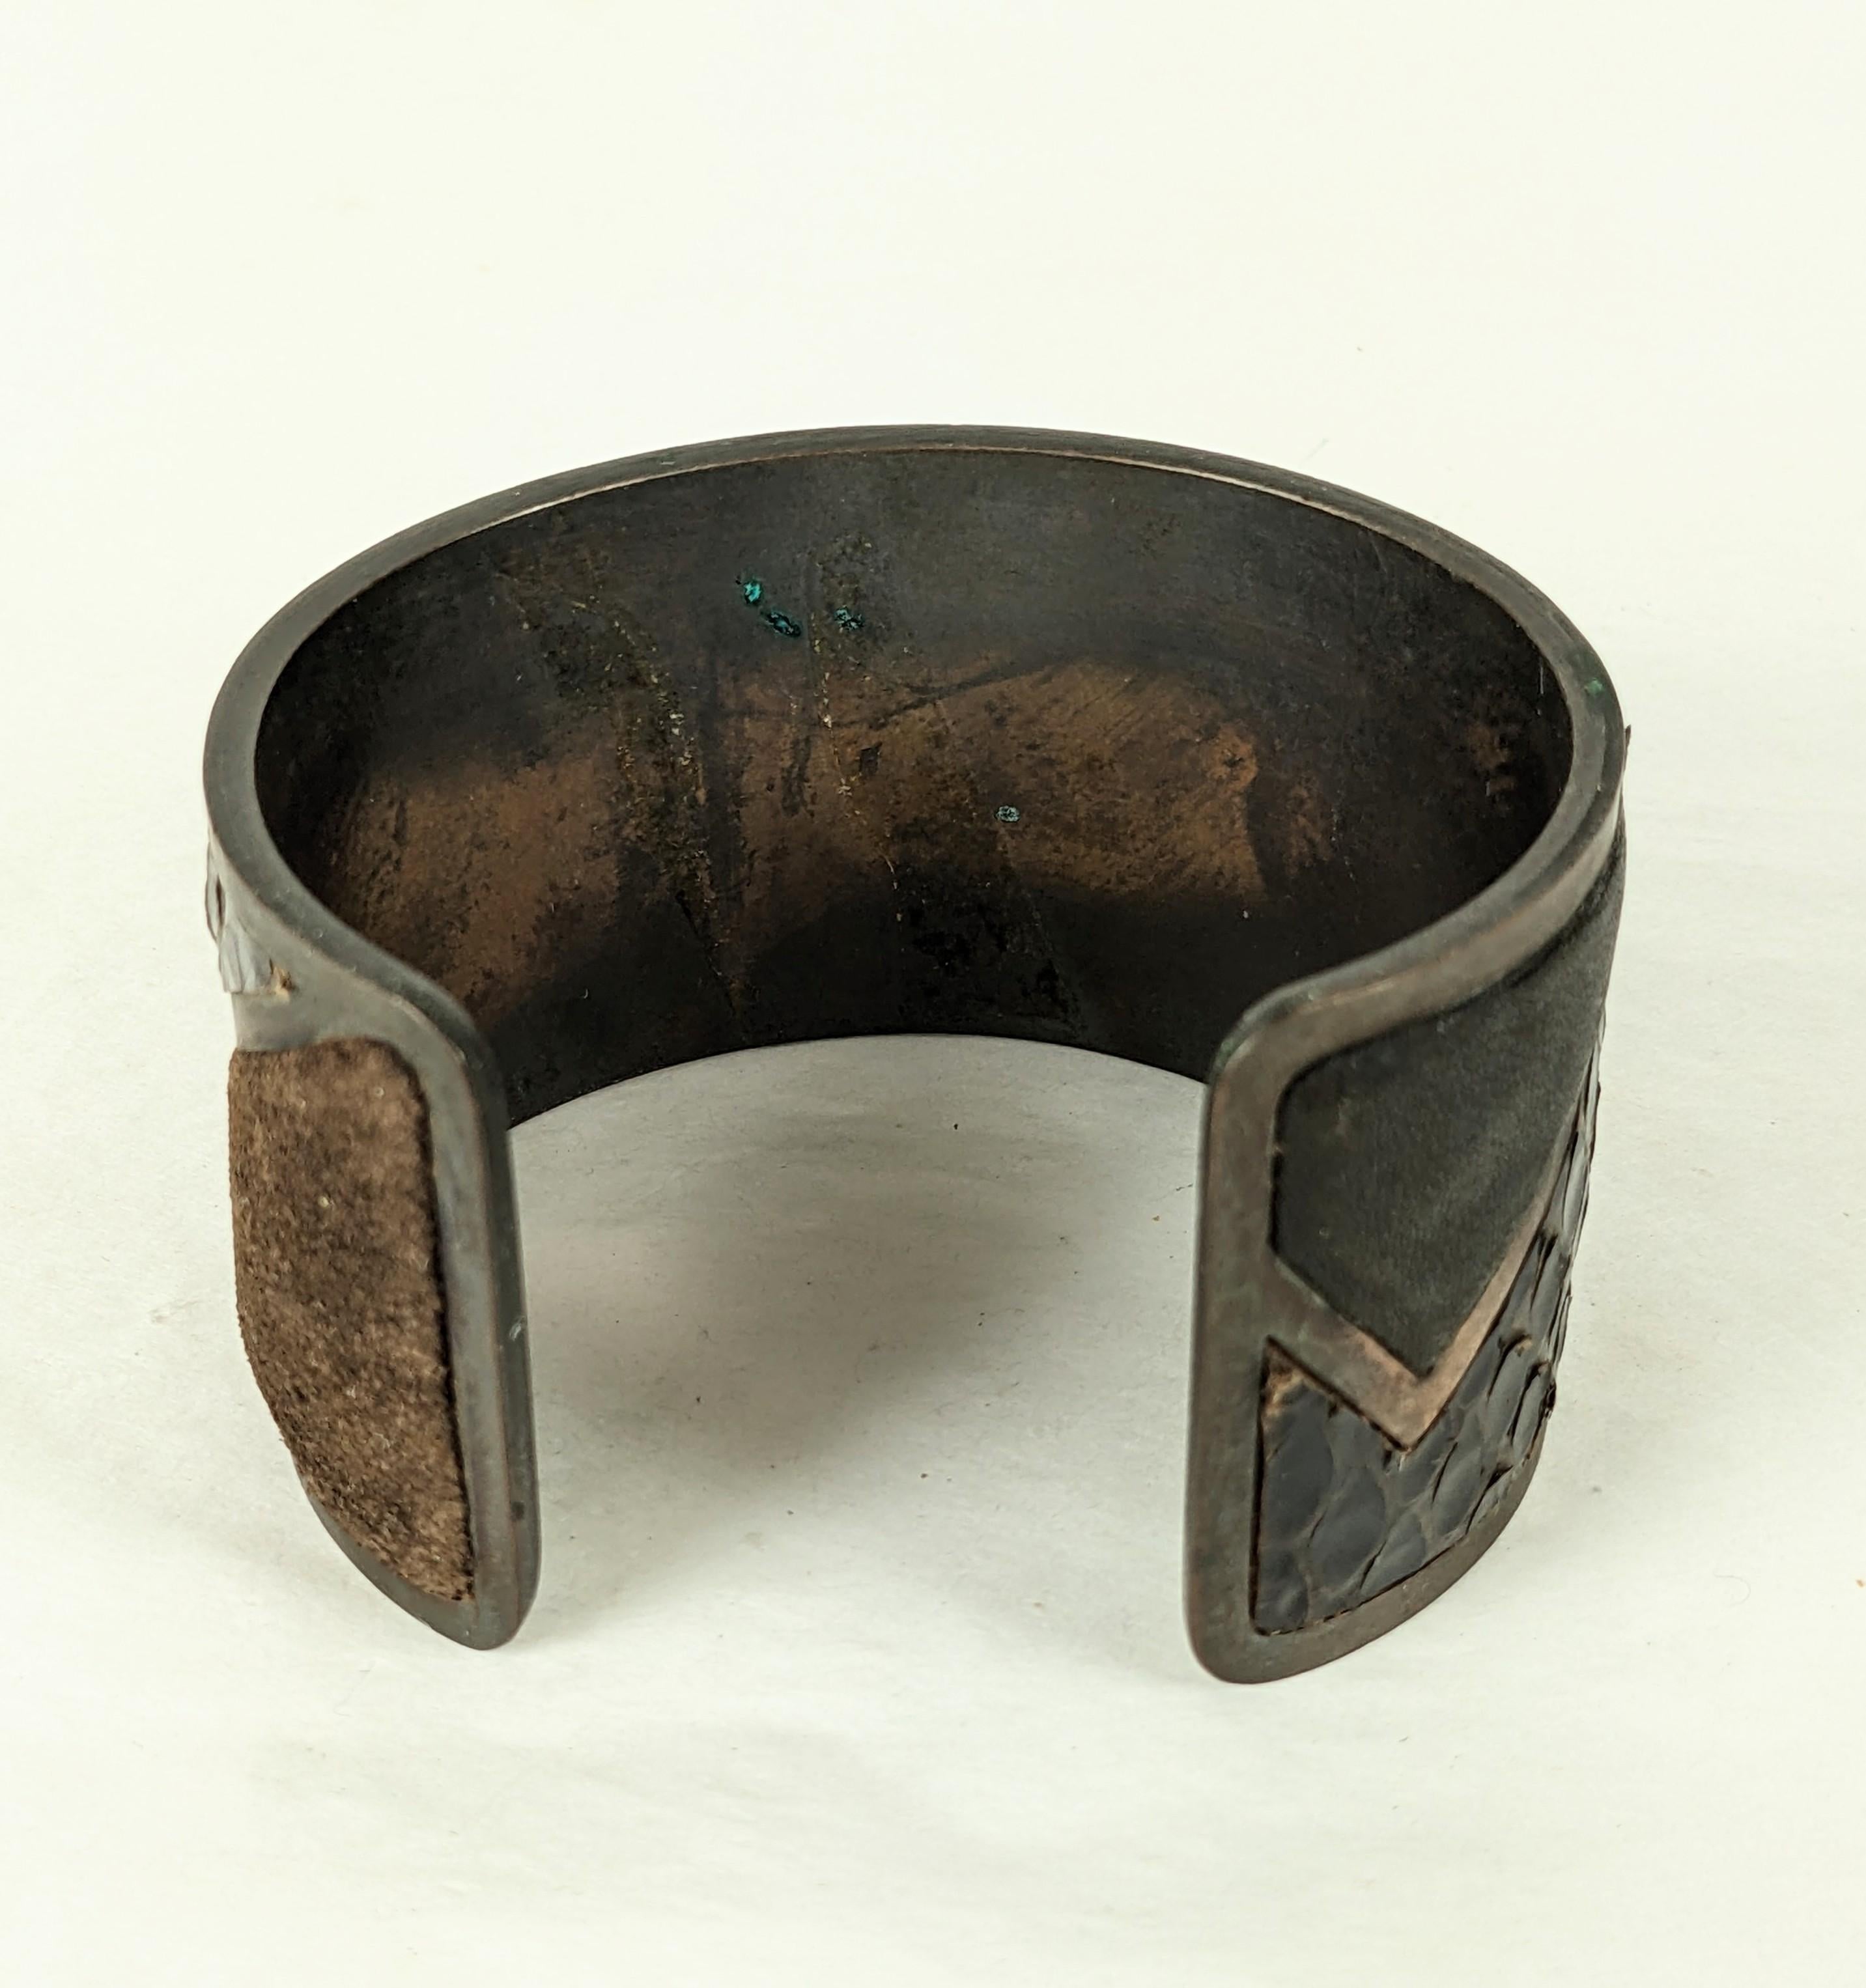 Yves Saint Laurent Haute Couture Bronze and Exotic Skin Cuff, 1980 For Sale 2